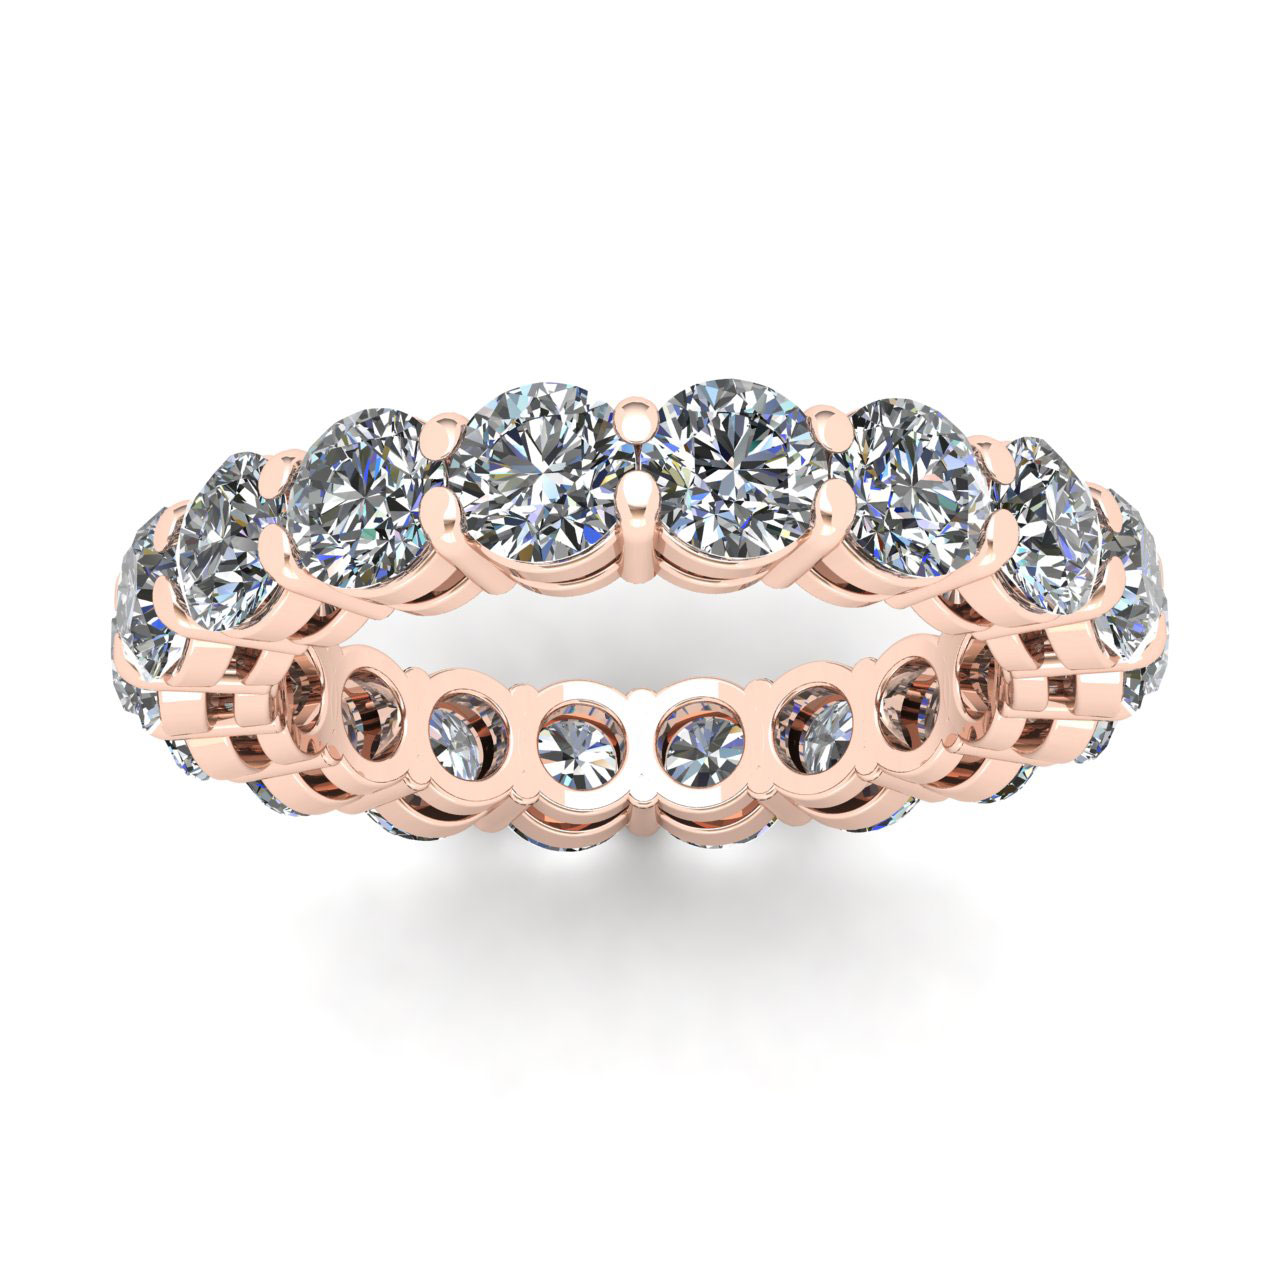 Jewel We Sell Natural 4.50Ct Round Diamond Shared Prong Gallery Ladies Anniversary Wedding Eternity Band Ring Solid 18k Rose Gold G SI1